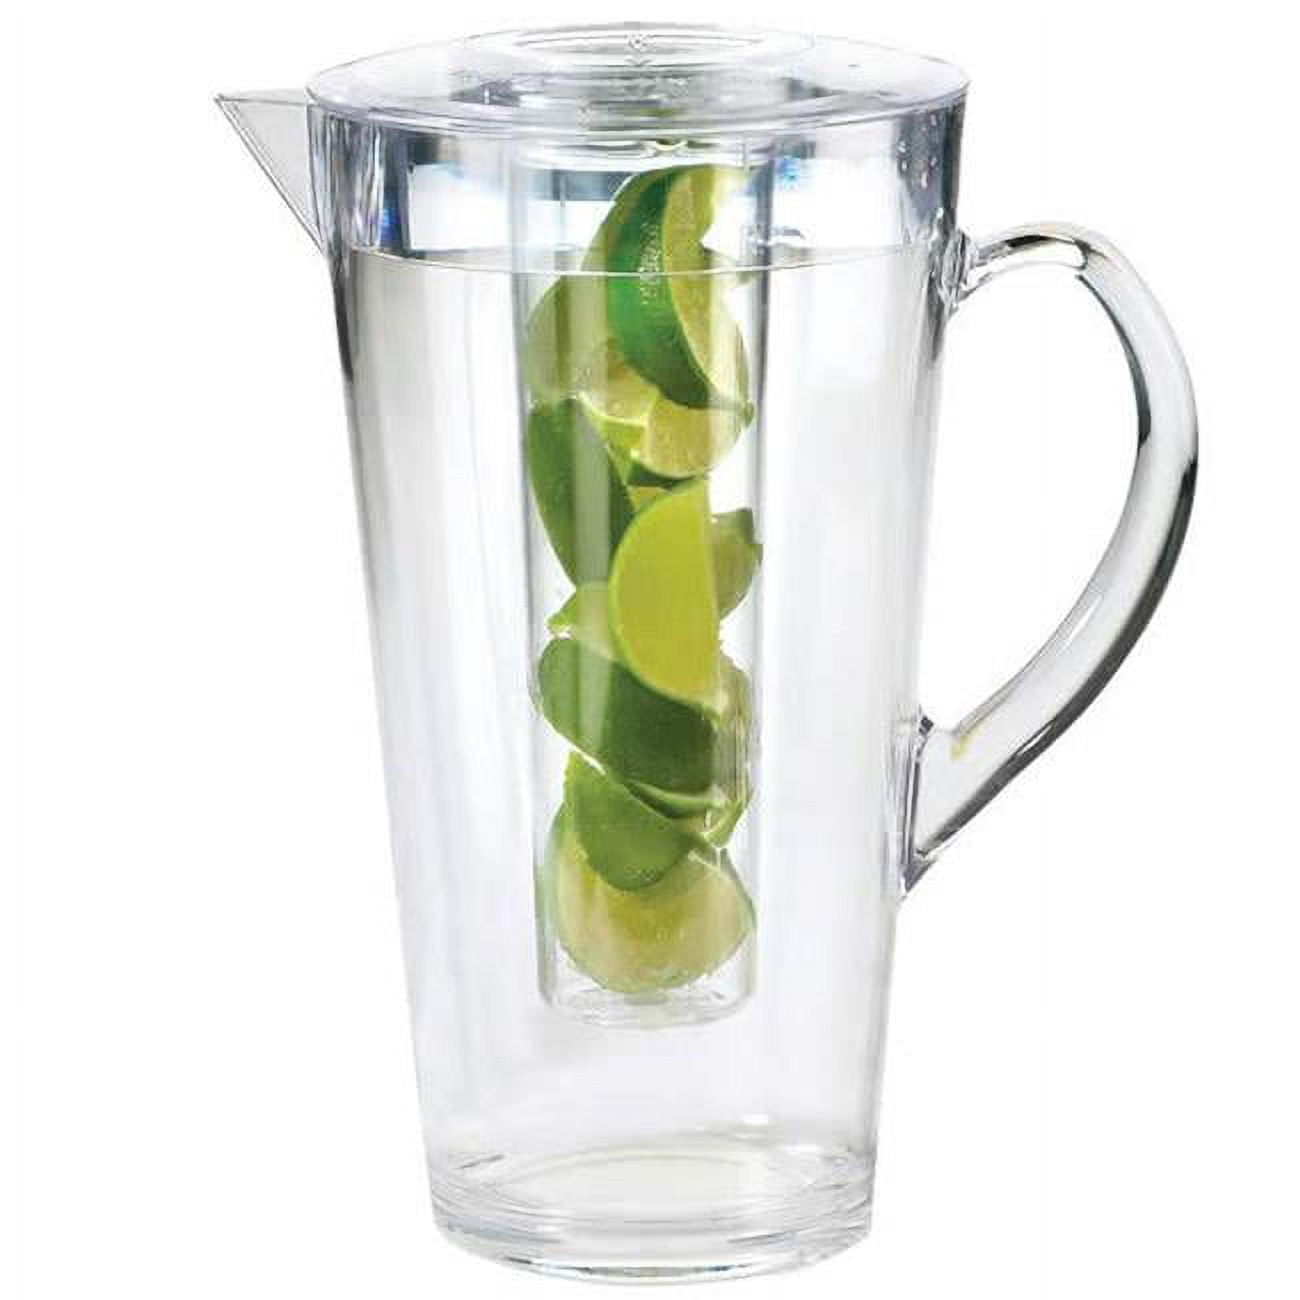 682-infusion 2 Ltr Polycarbonate Pitcher With Infusion Chamber - 9x9 X 10 In.